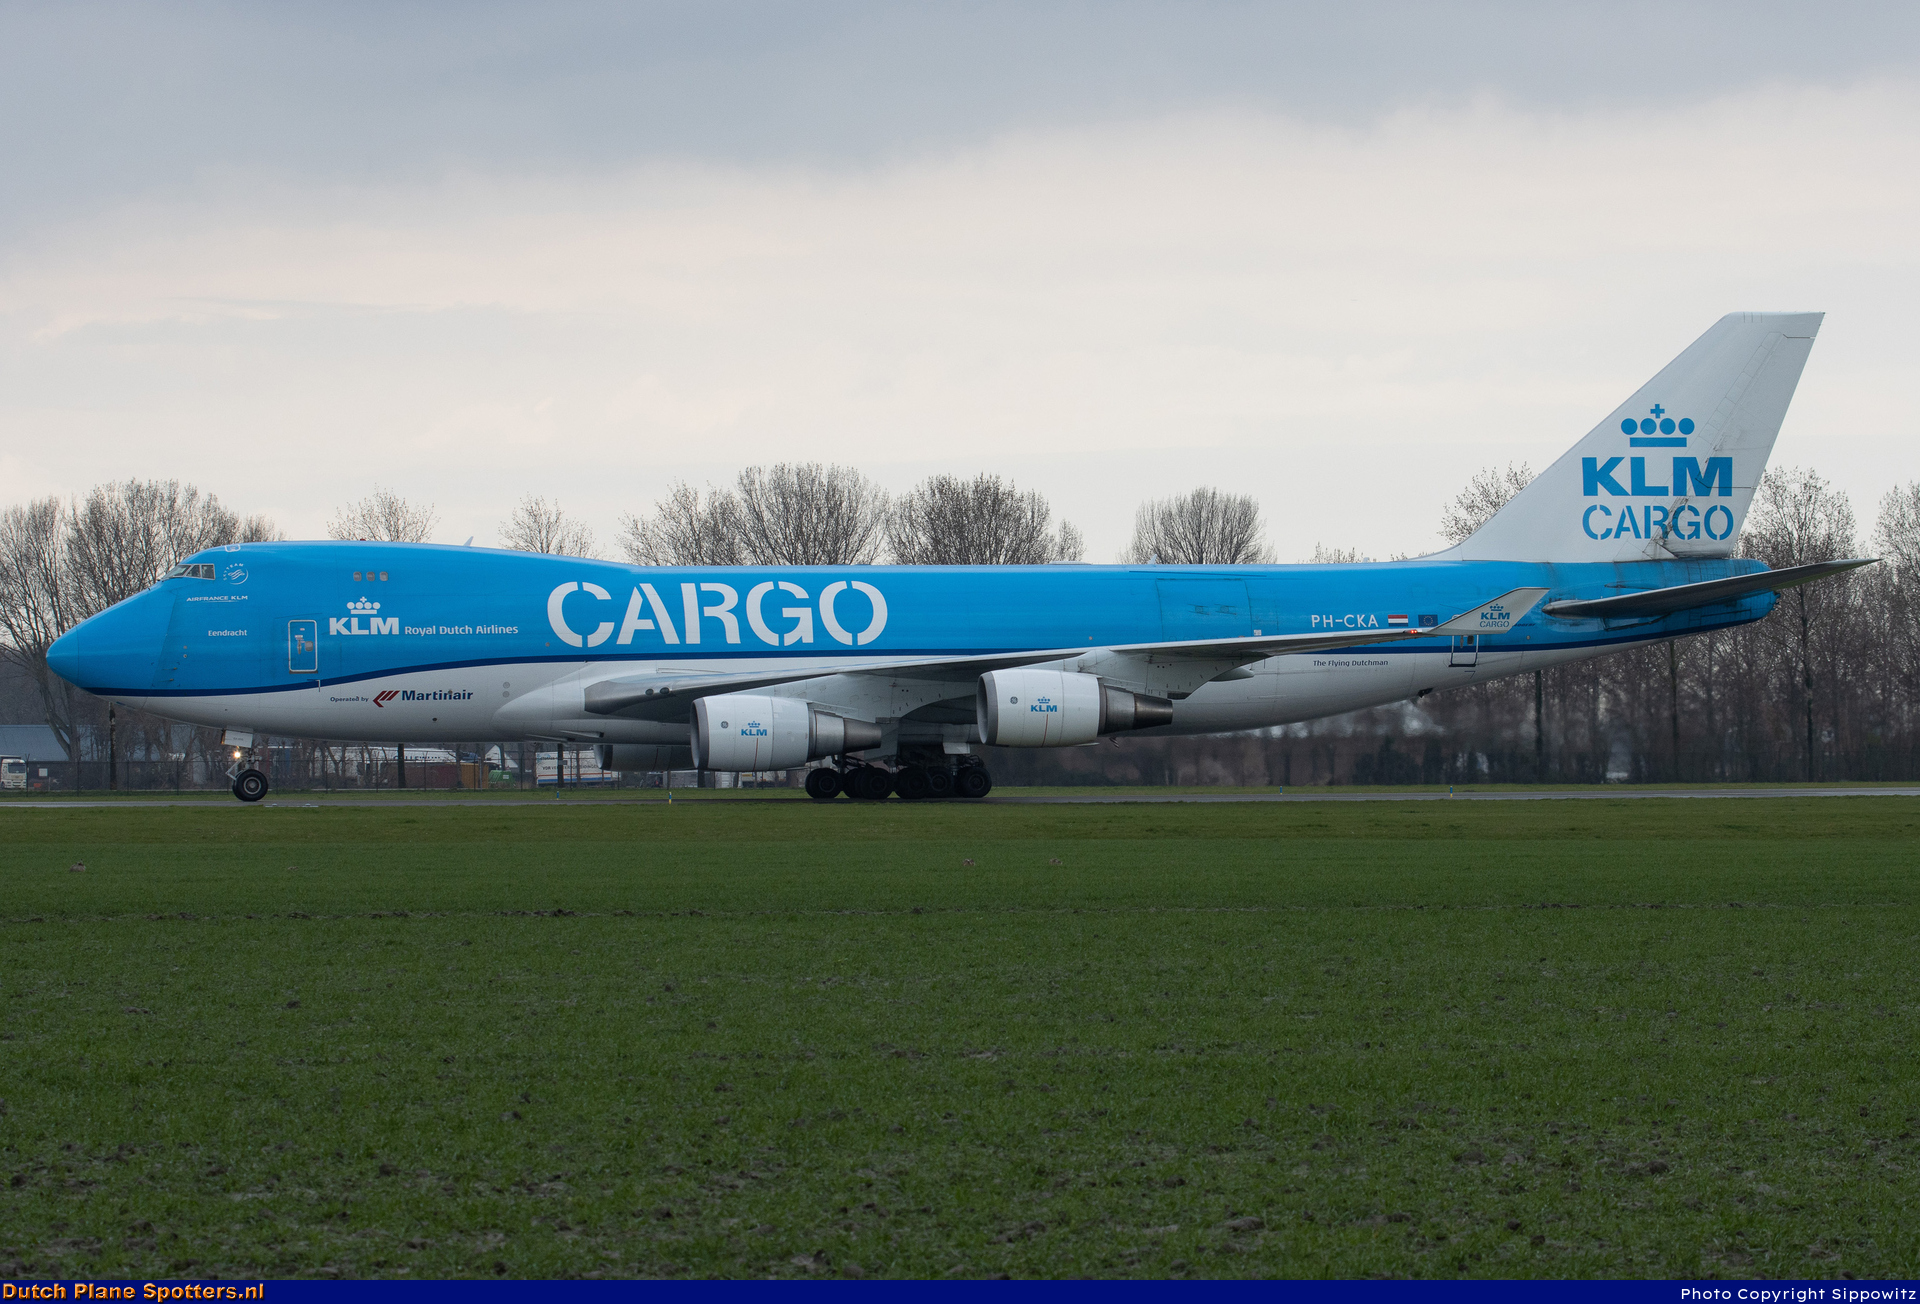 PH-CKA Boeing 747-400 KLM Cargo by Sippowitz